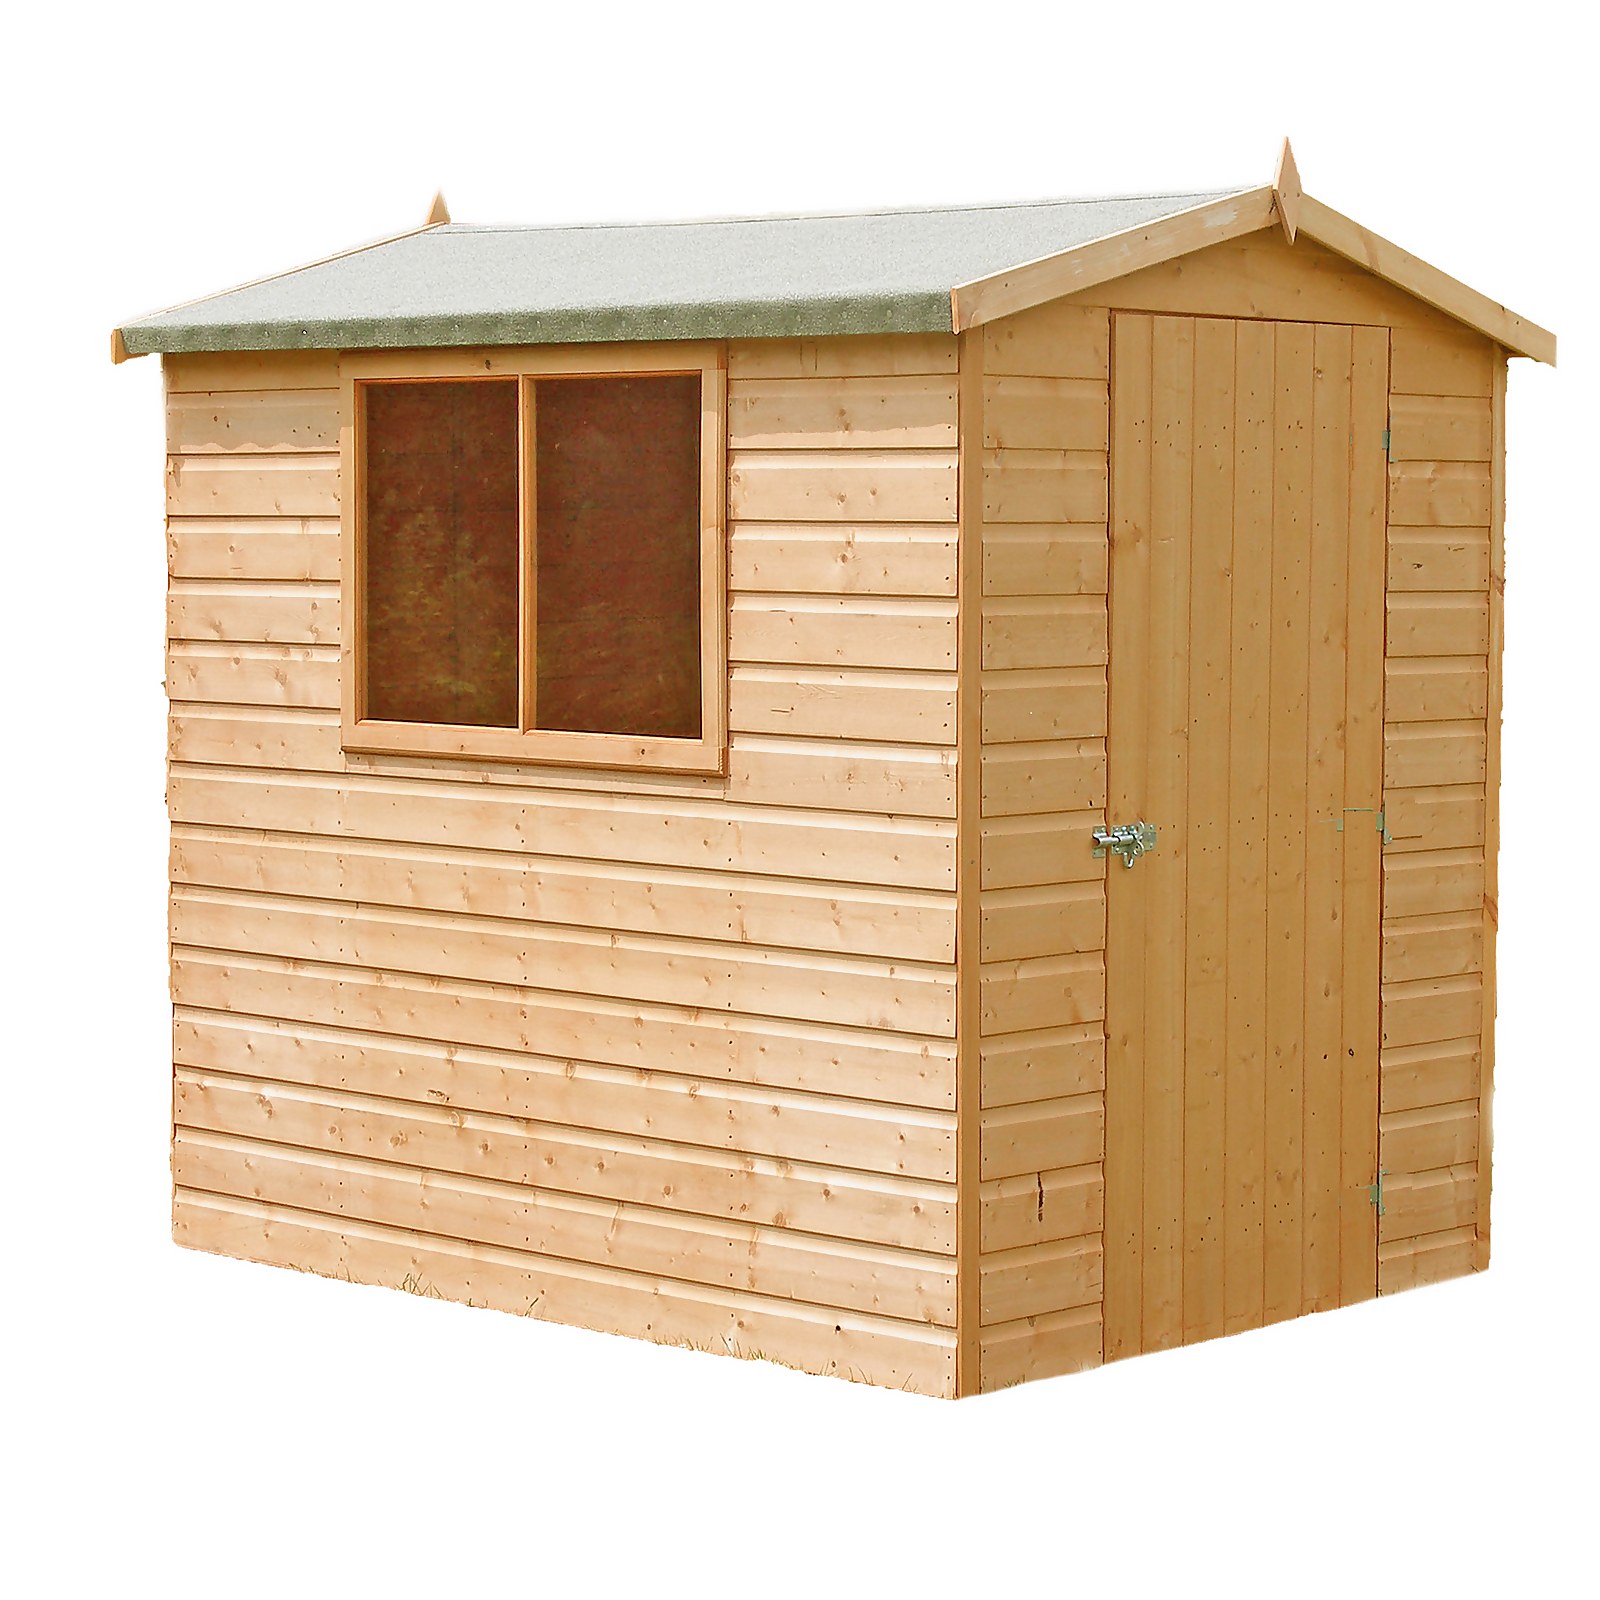 Shire 7 x 5ft Lewis Garden Shed - Including Installation